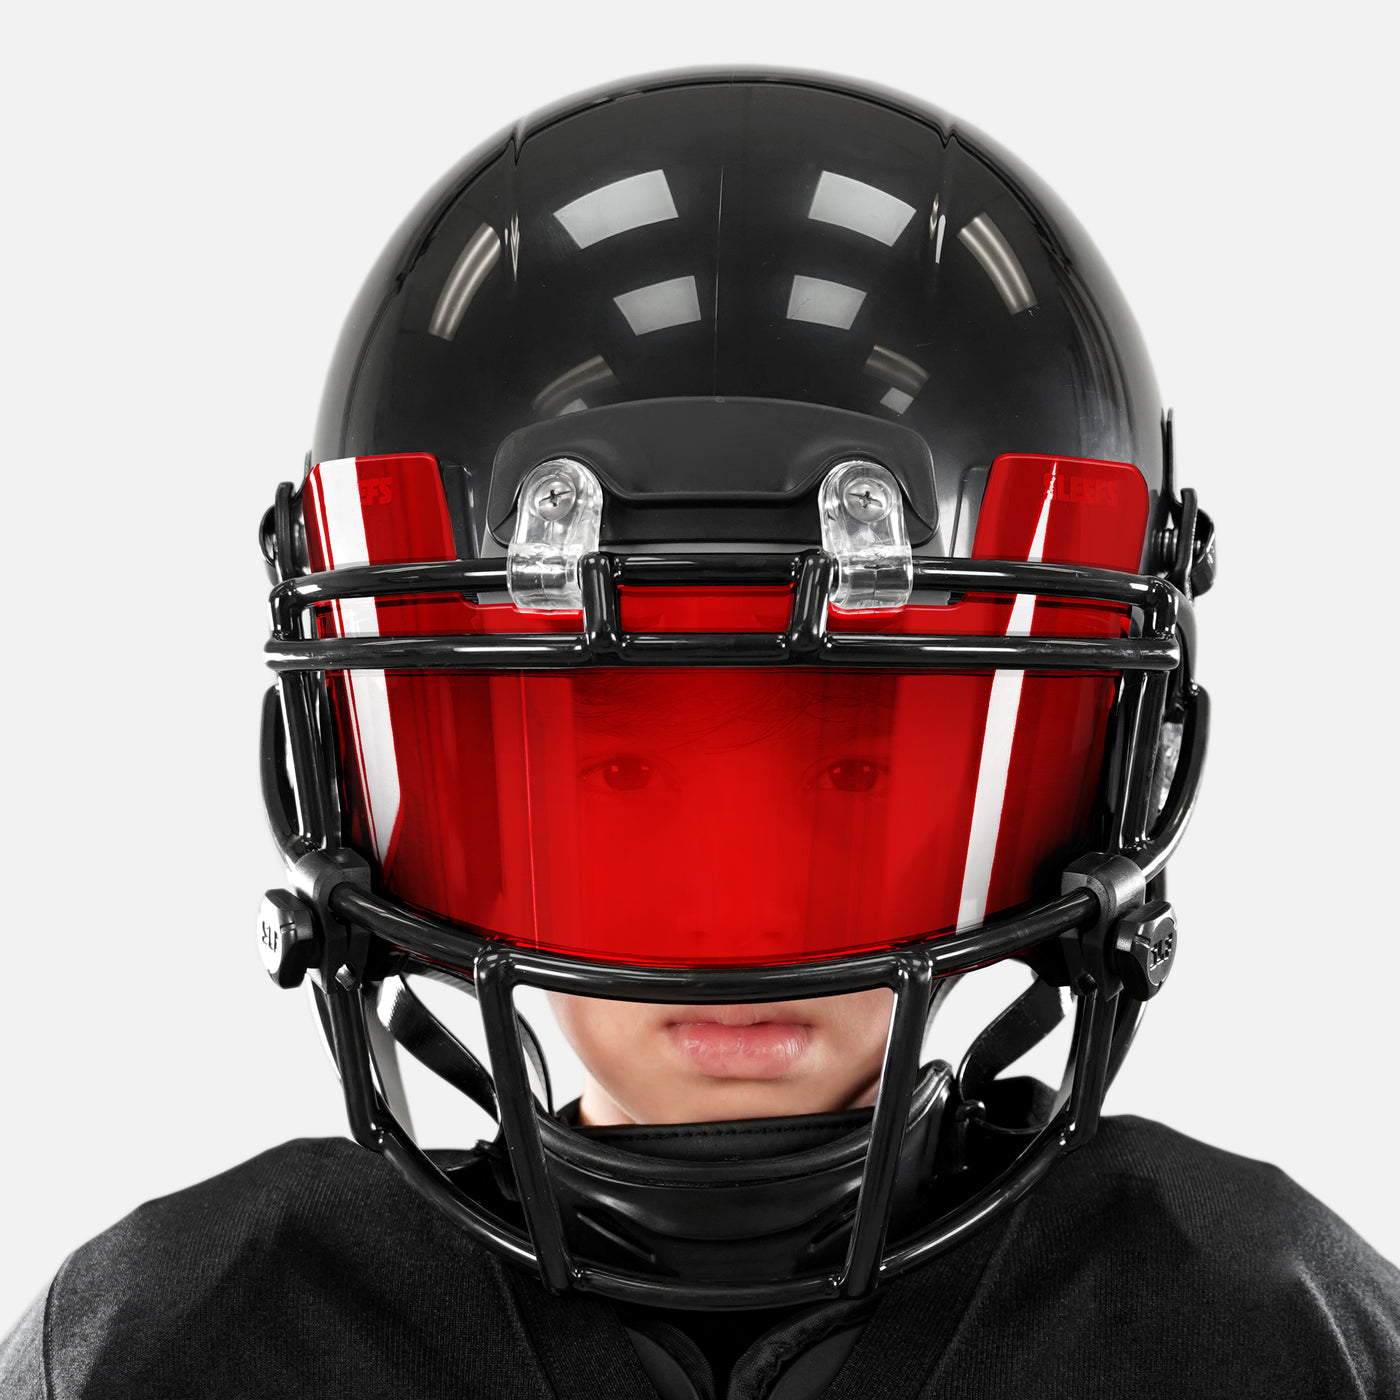 Red Clear Football 